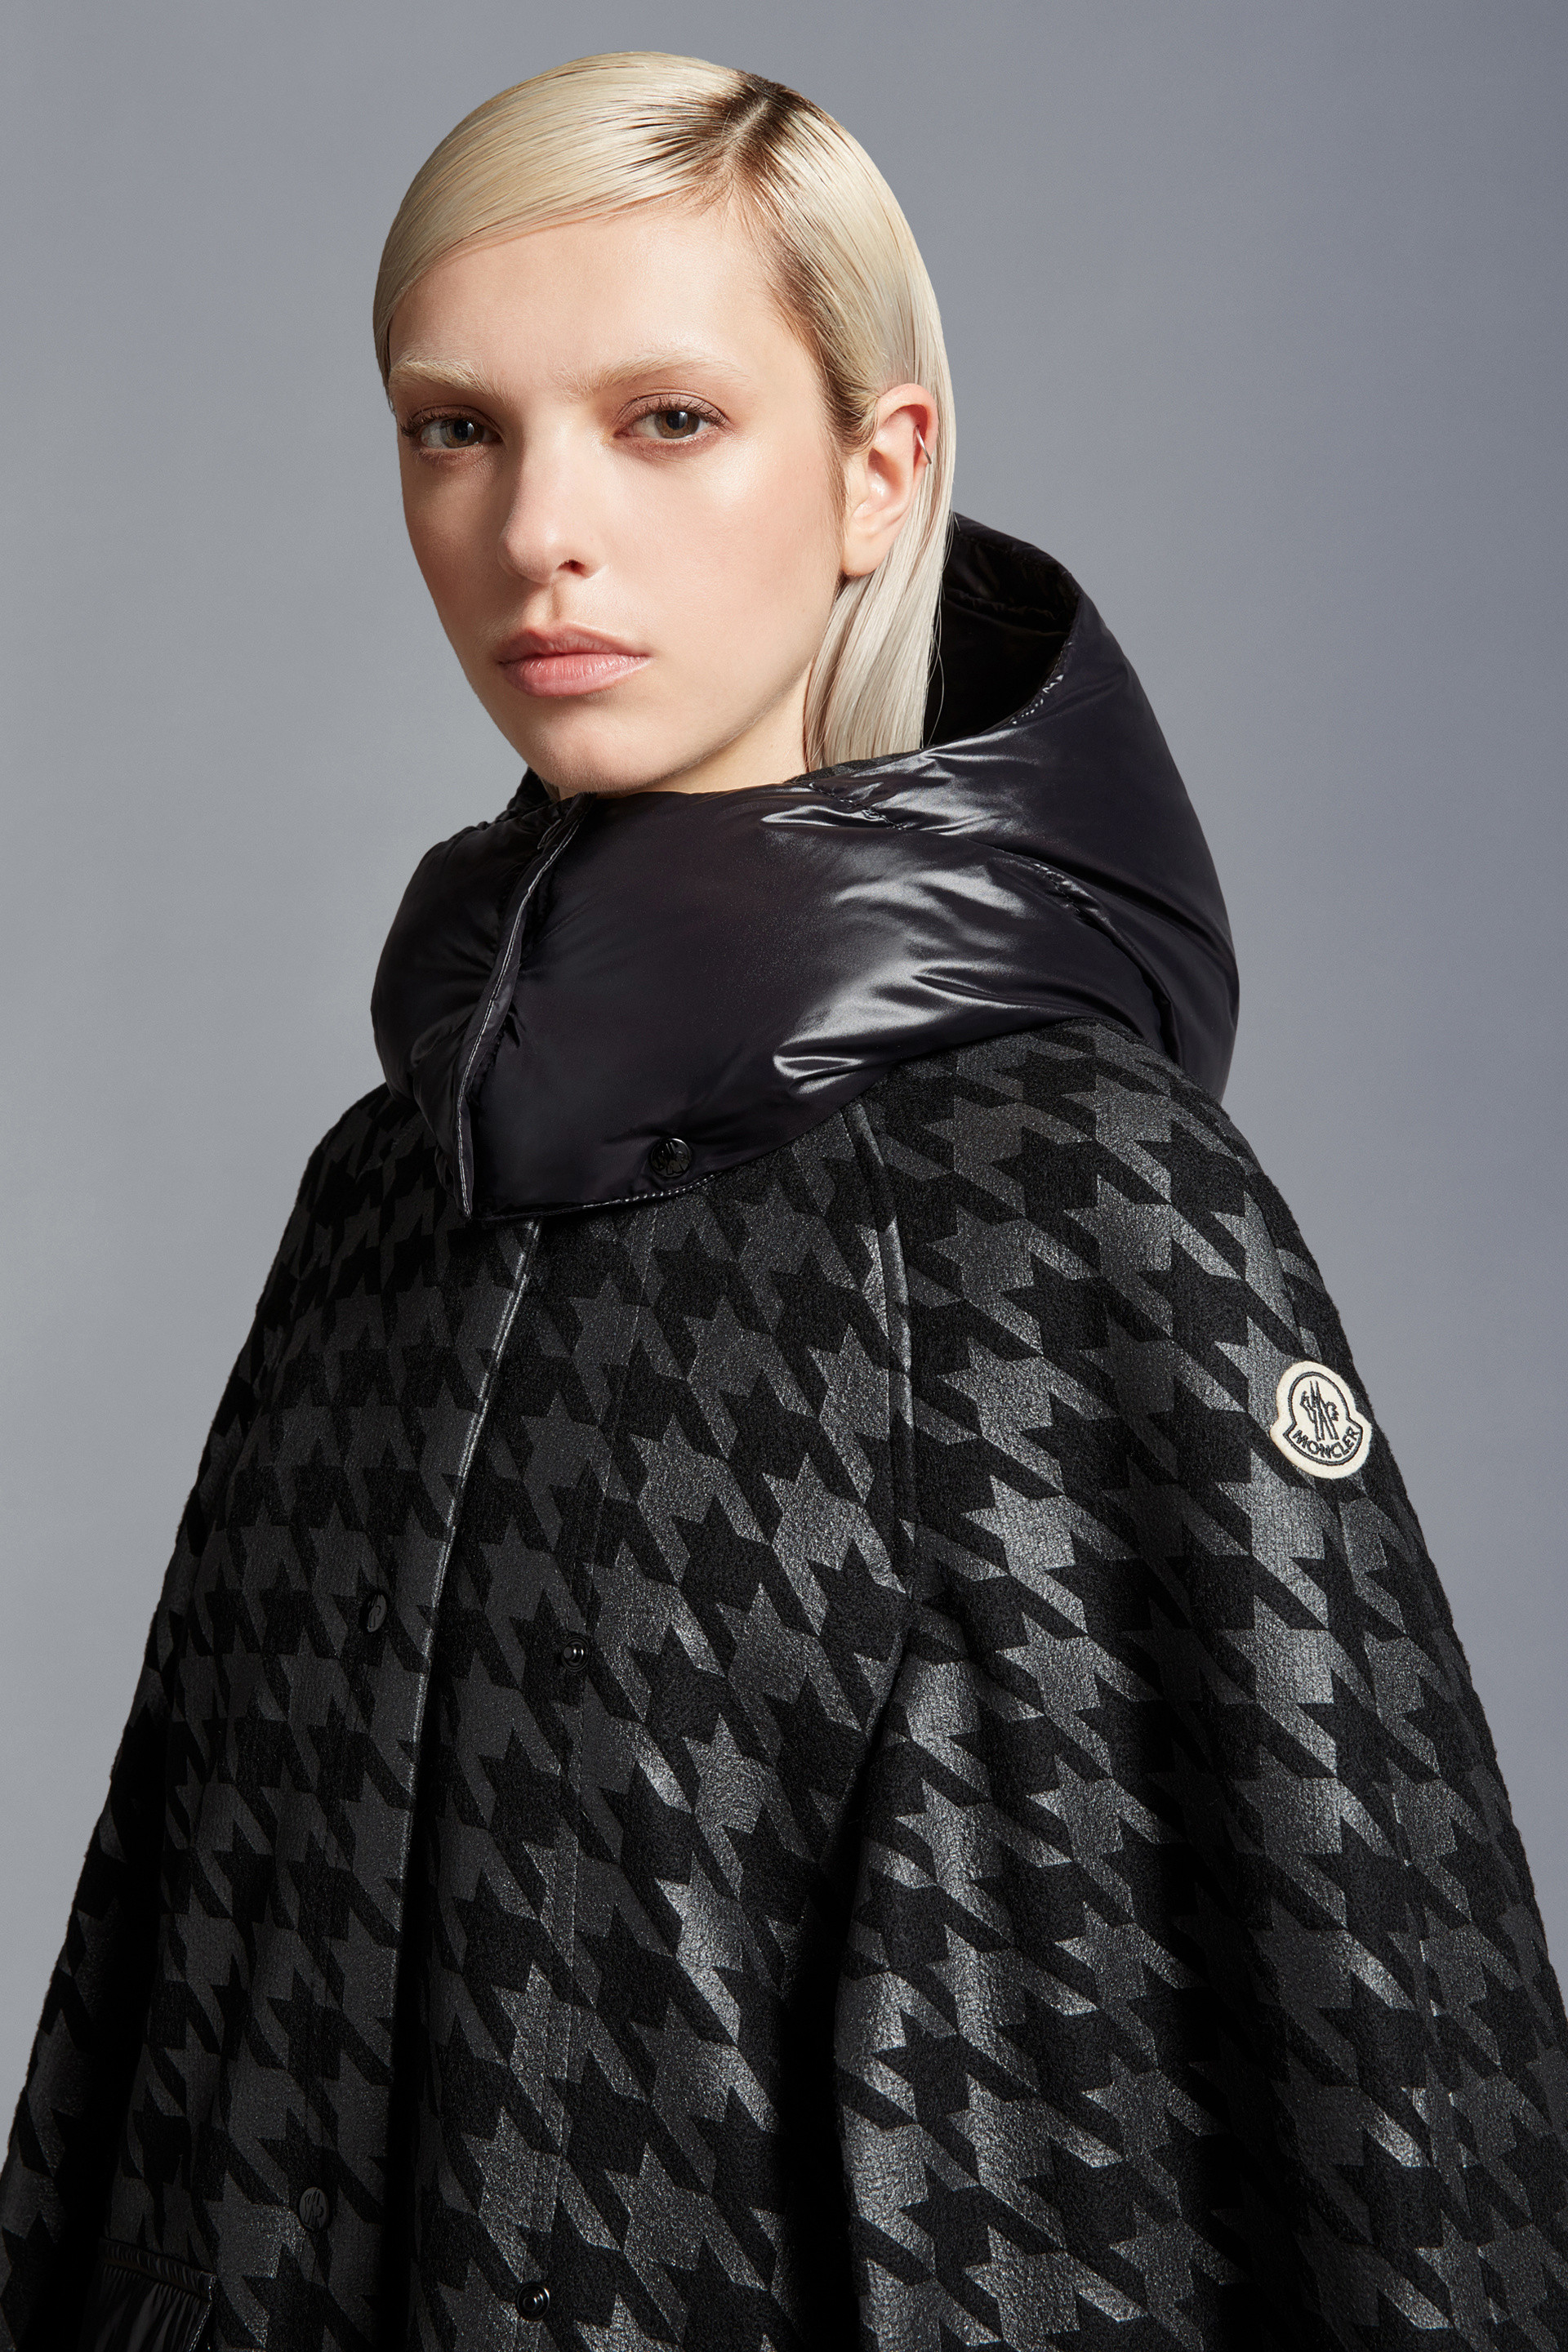 97%OFF!】 MONCLER CLOAK Poncho Coat Ladys Outer 2020AW モンクレール クローク マント ポンチョ  コート レディース アウター 2020-2021年秋冬